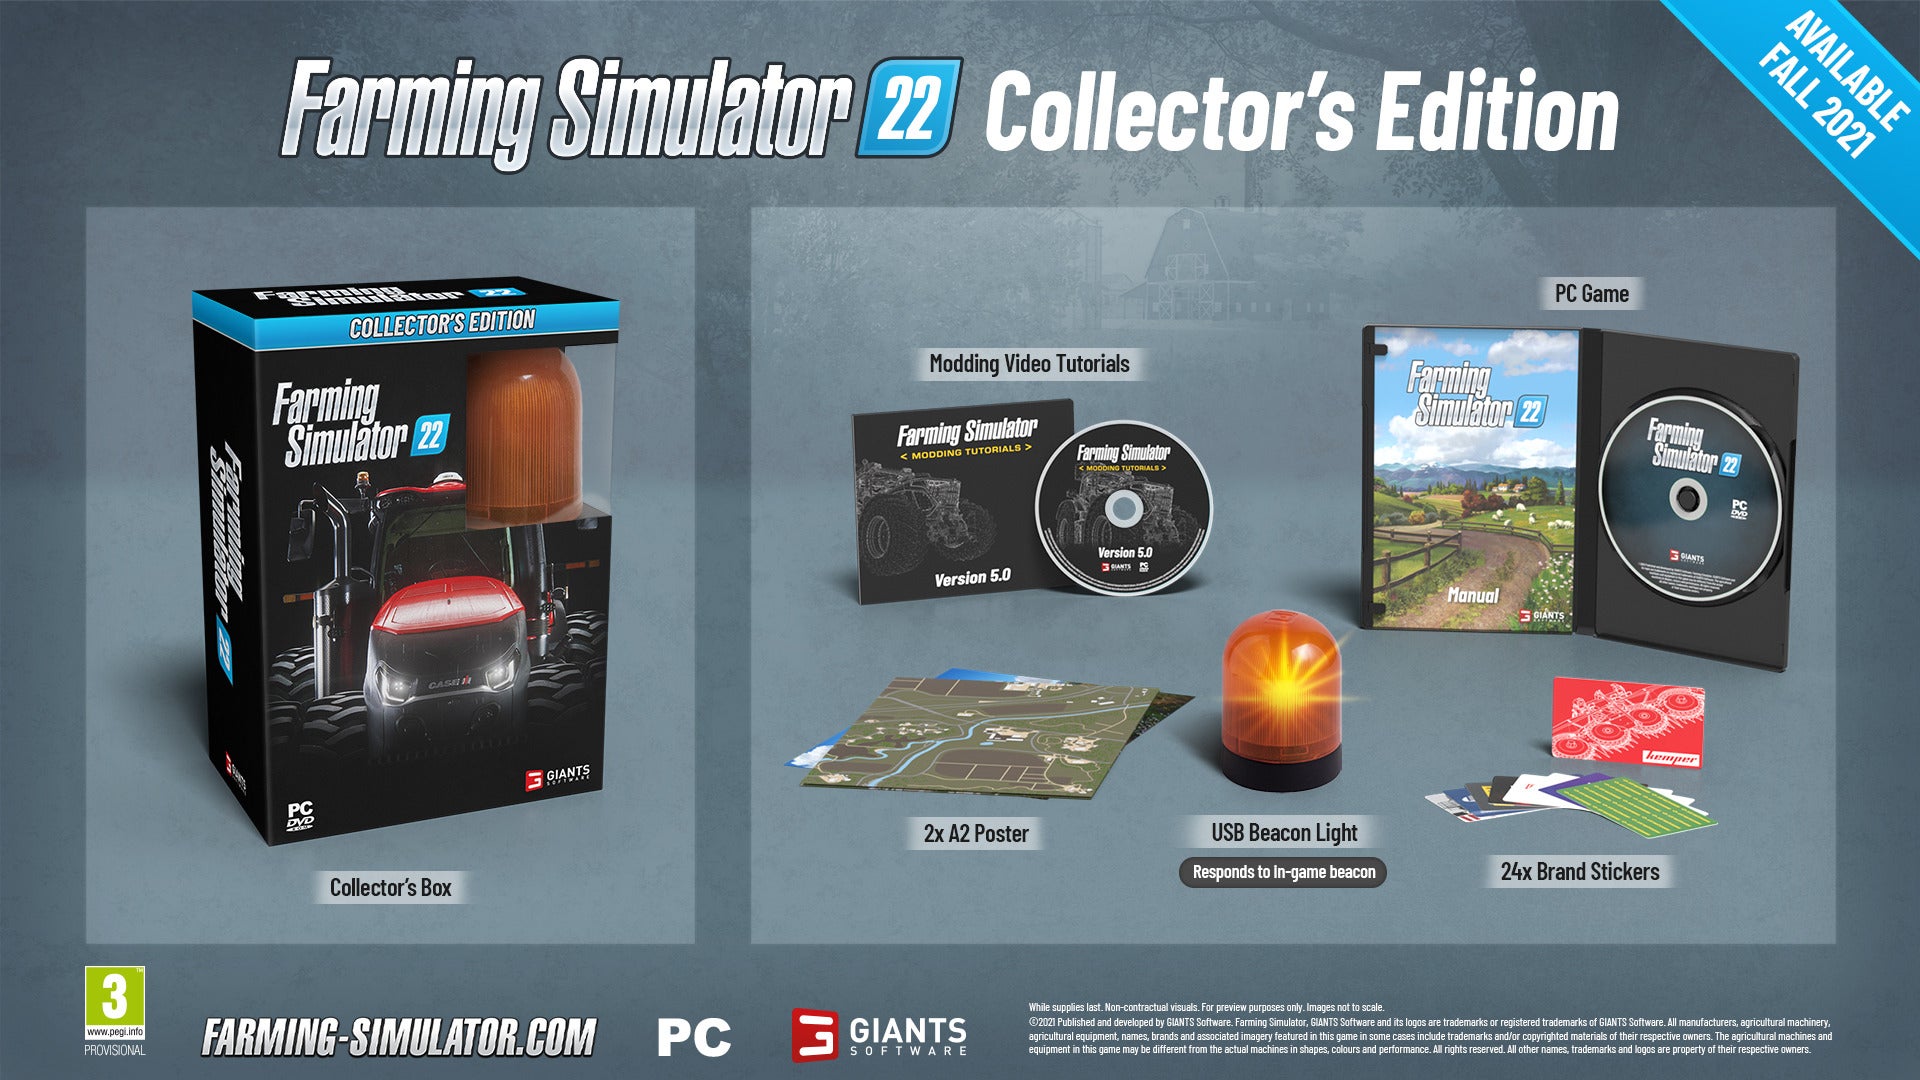 The contents of the Farming Simulator 22 Collector's Edition.